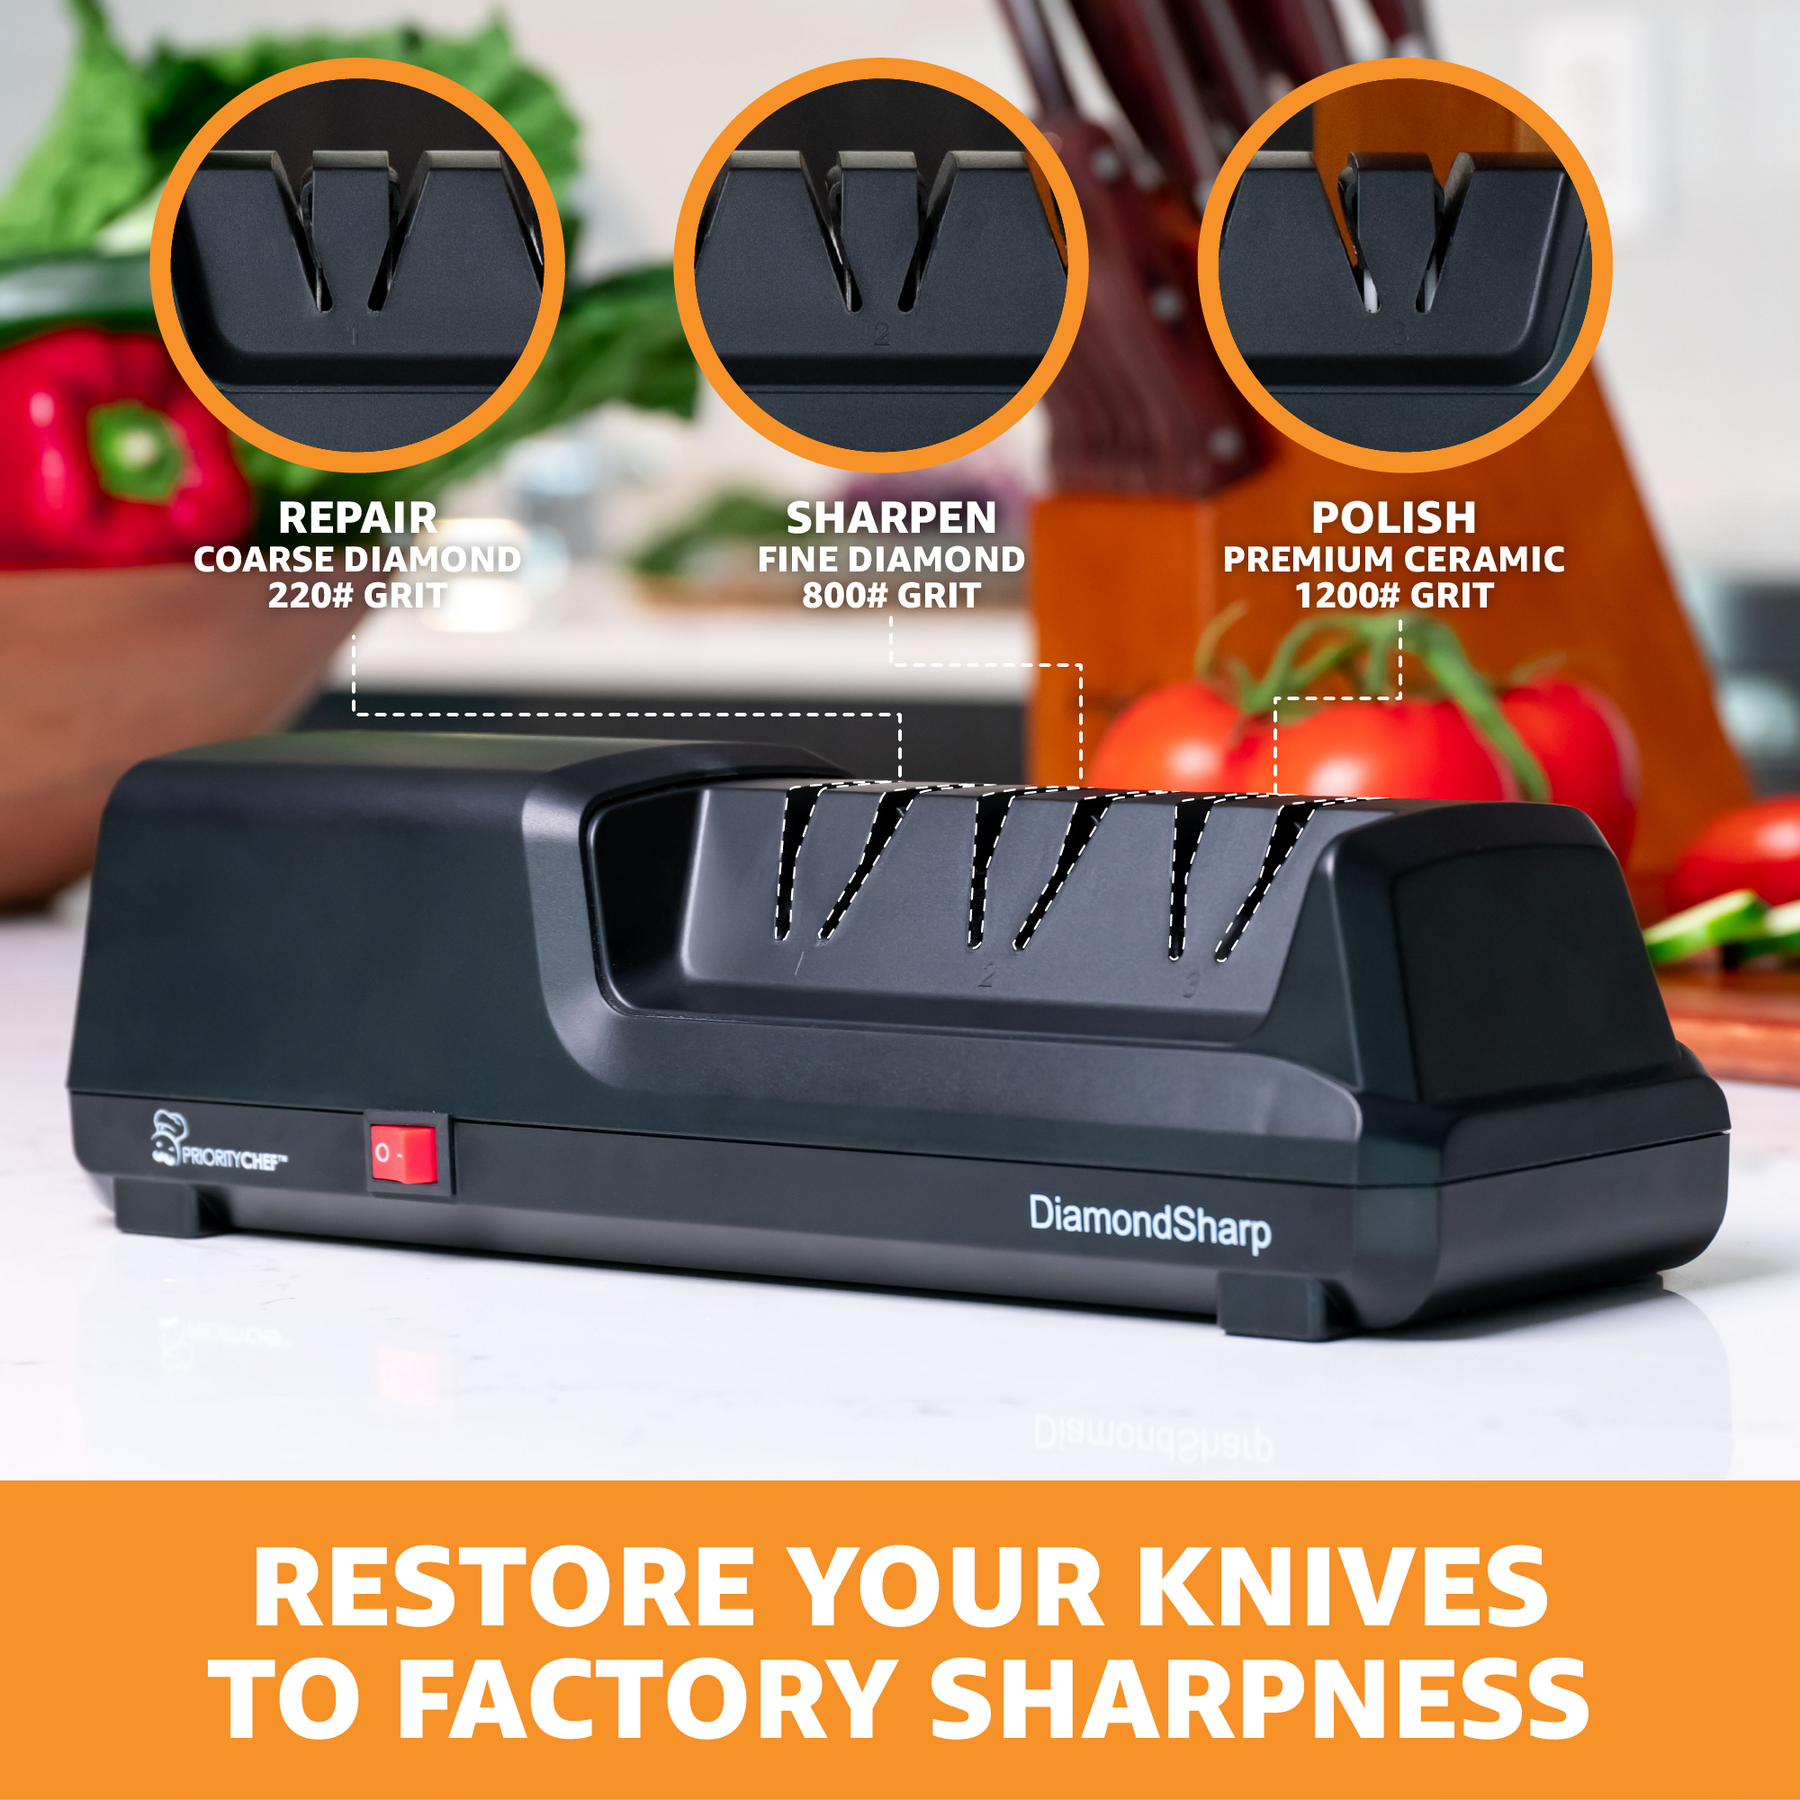 Chef'sChoice DC Electric Knife Sharpener